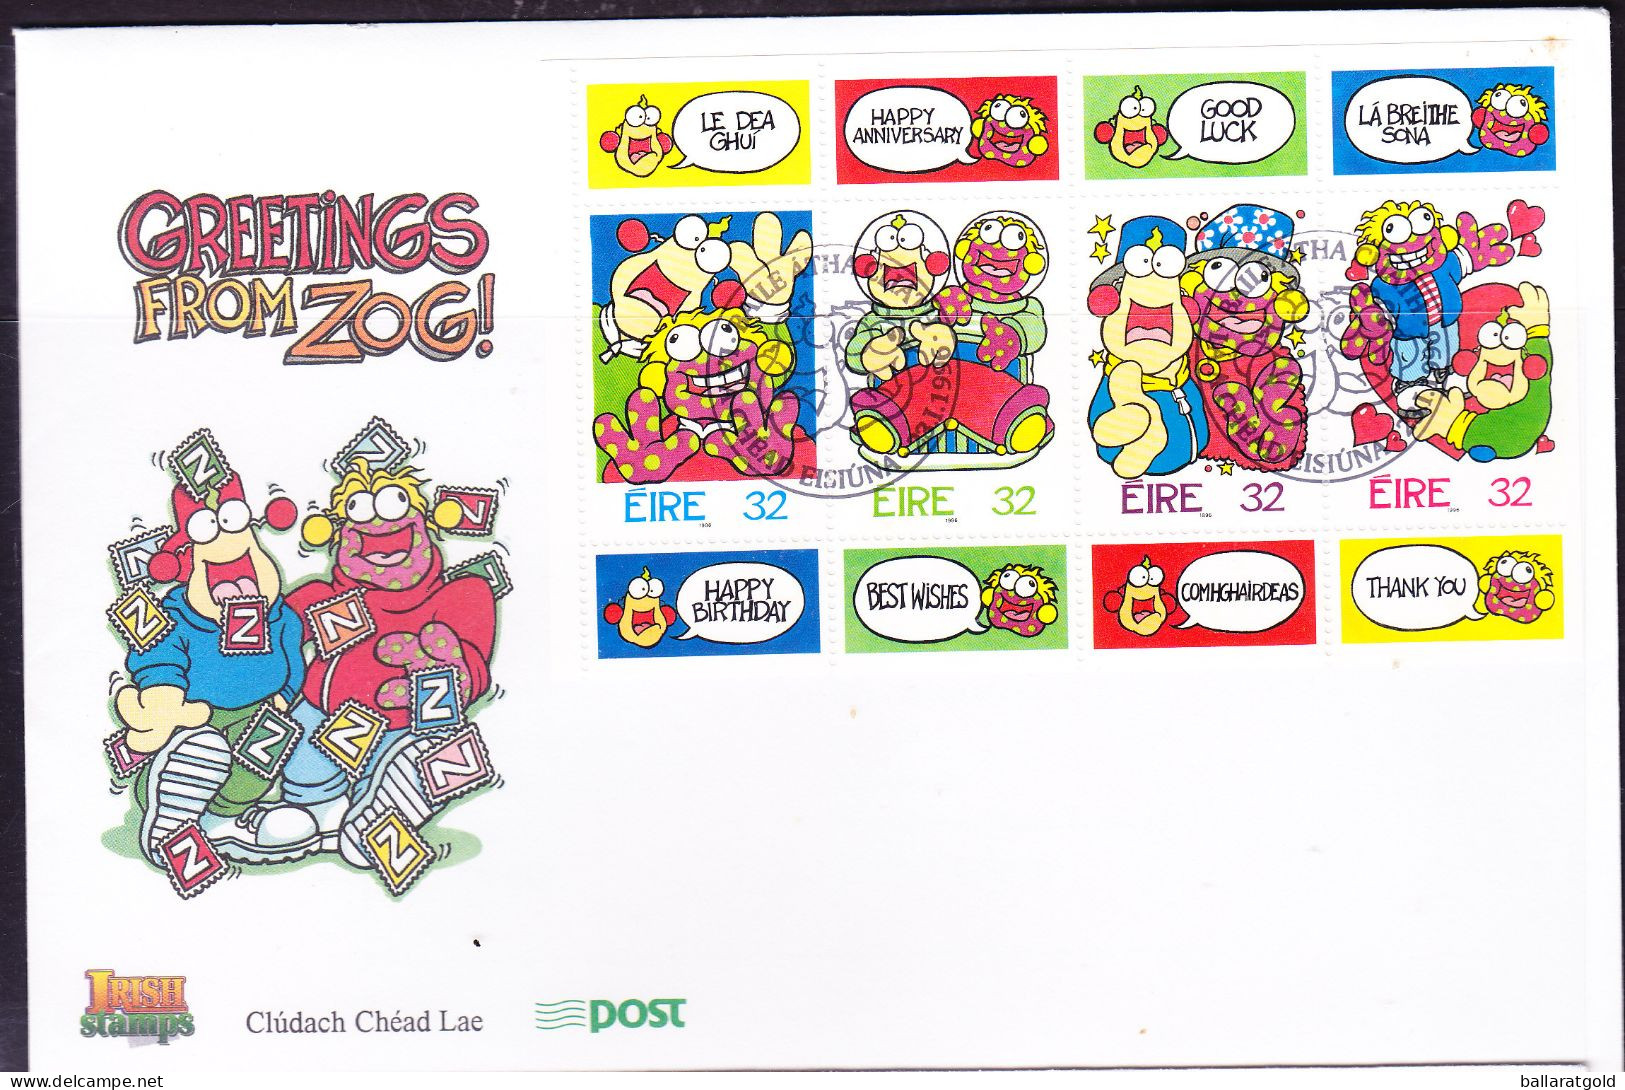 Ireland 1997 Greetings From ZOG First Day Cover - Unaddressed - Covers & Documents